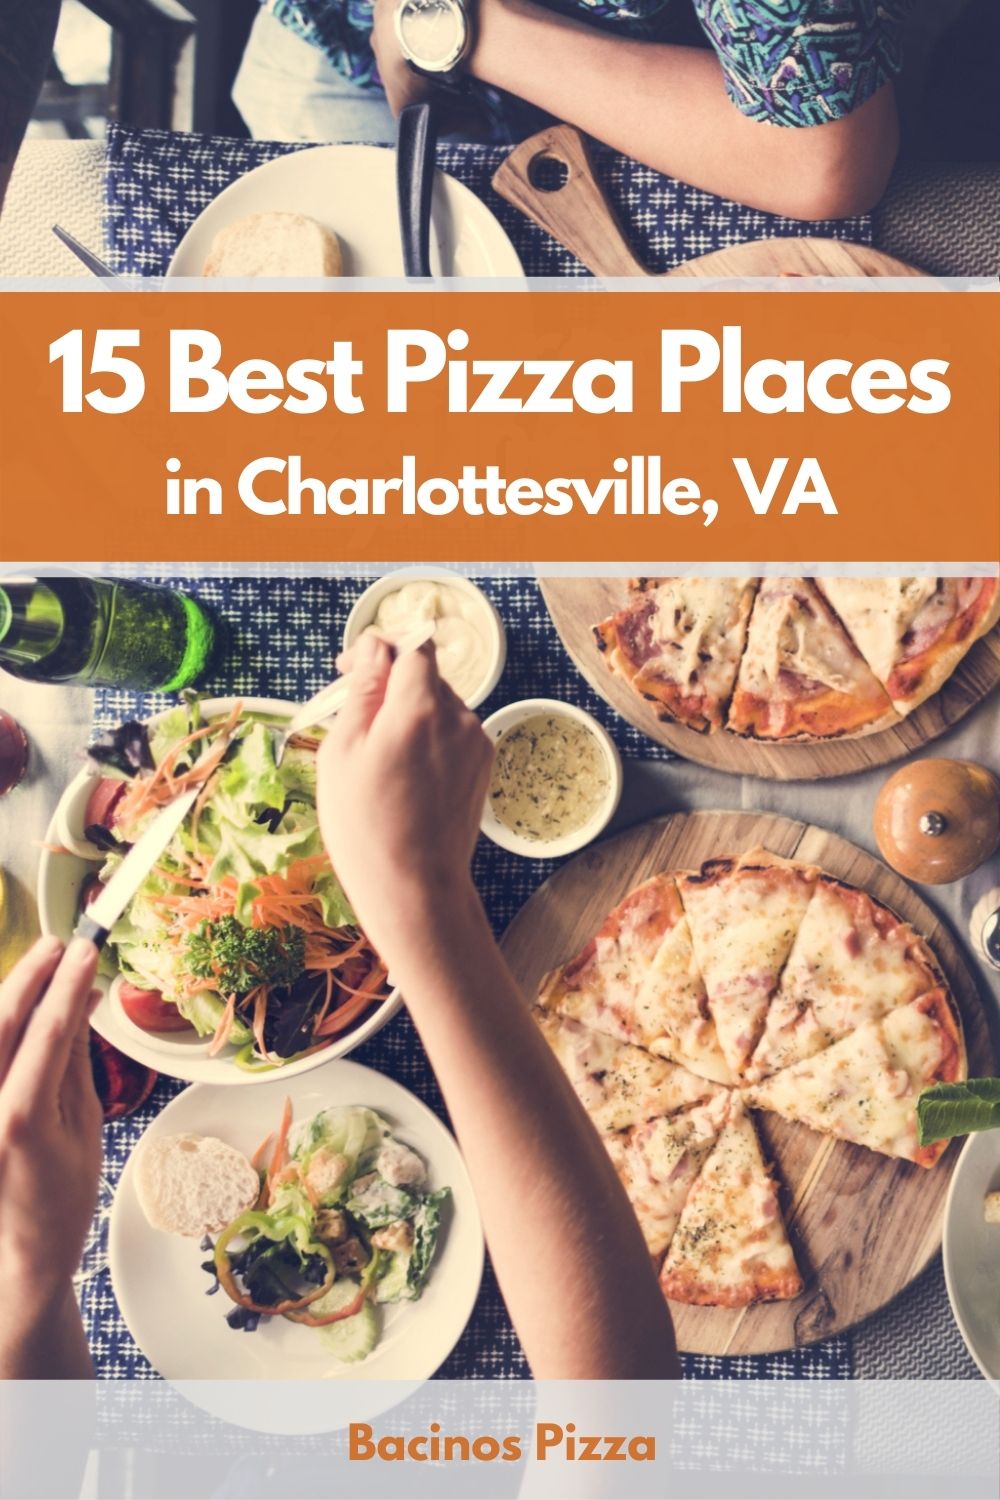 15 Best Pizza Places in Charlottesville, VA pin 2